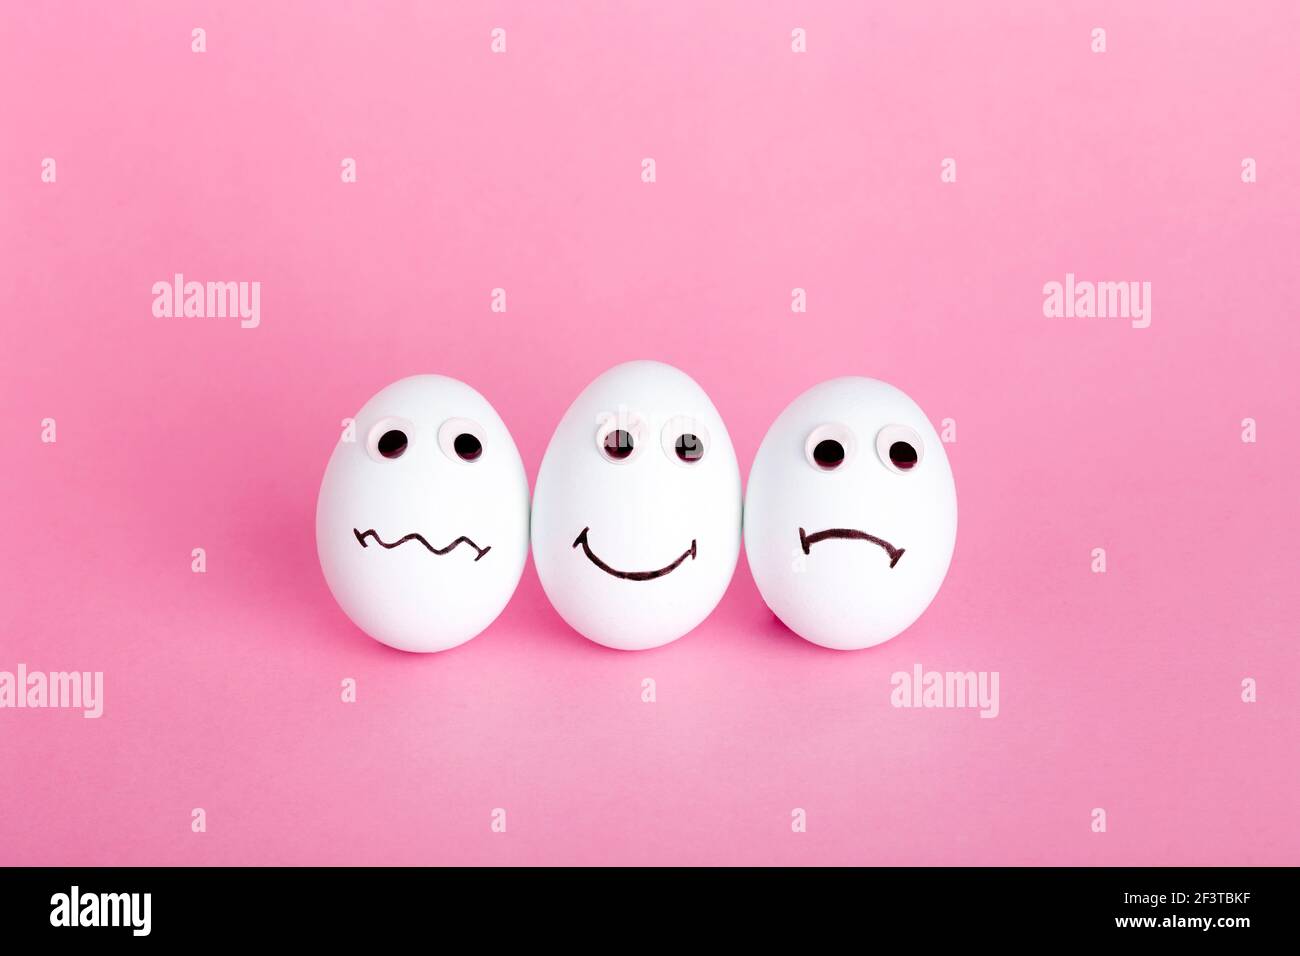 Fun creative food for kids. Eggs minimal concept. White funny eggs for breakfast on a colored background. Stock Photo